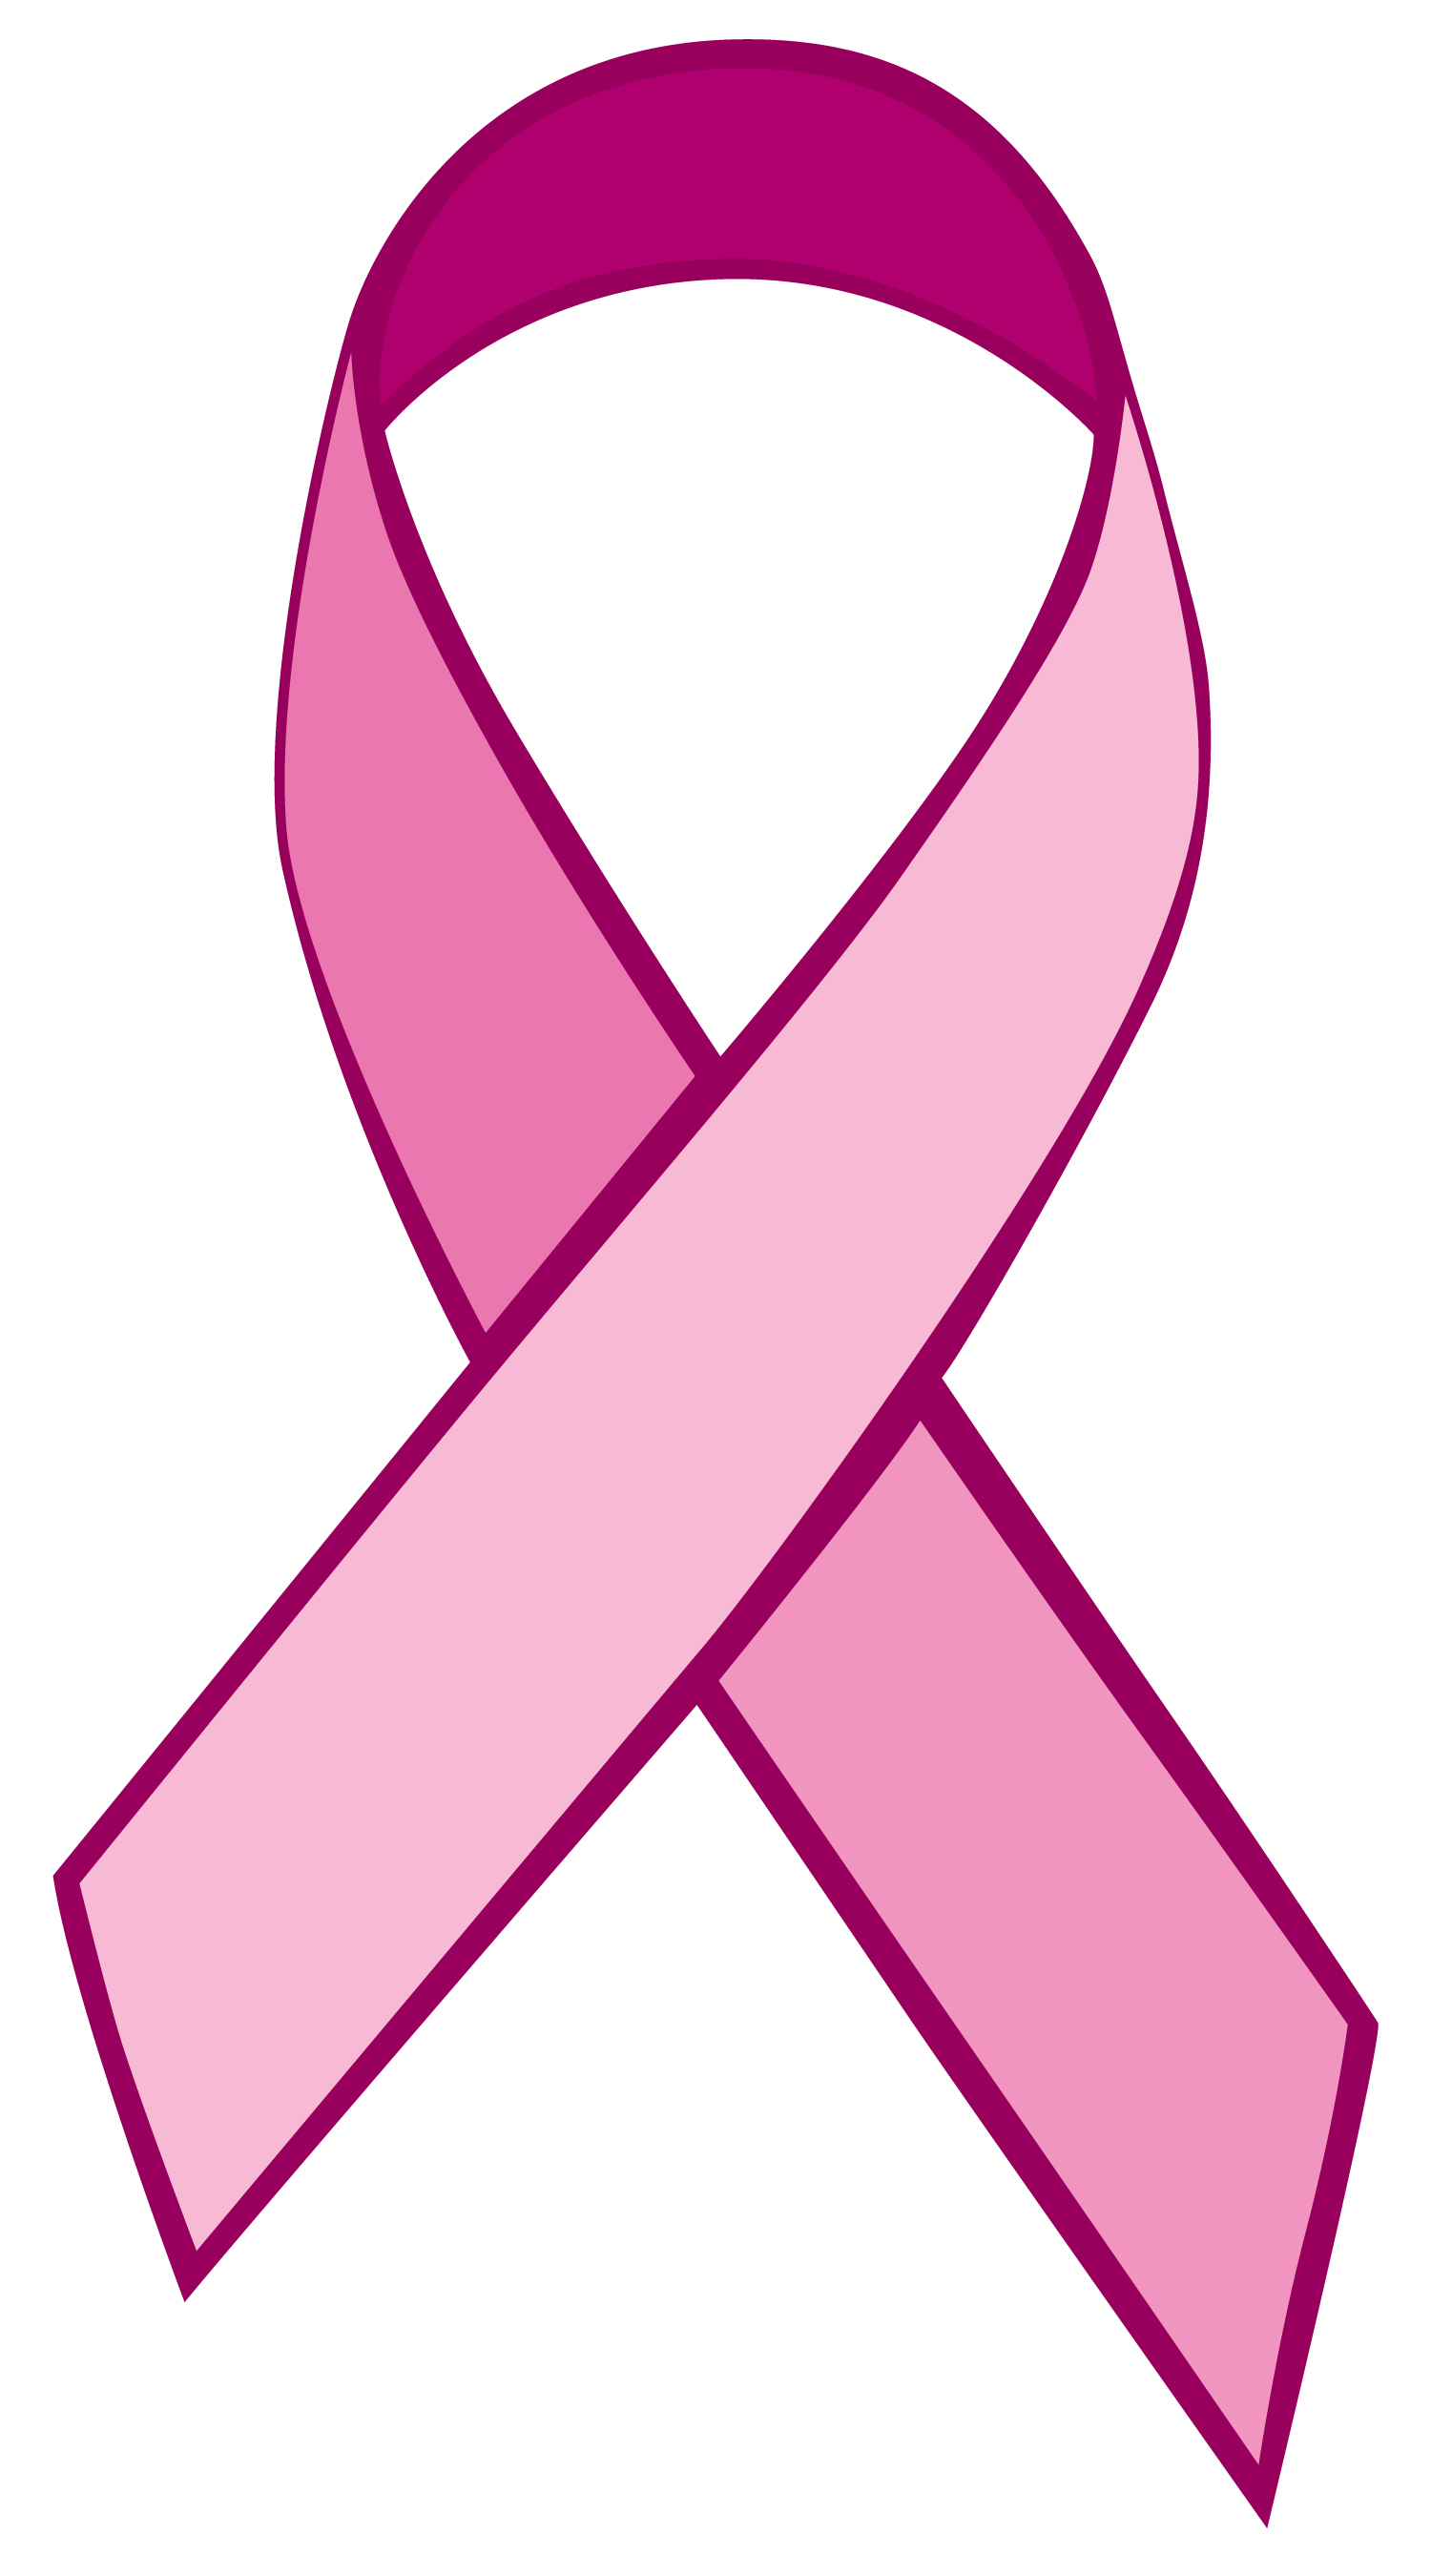 Breast Cancer Awareness Clipart - ClipArt Best